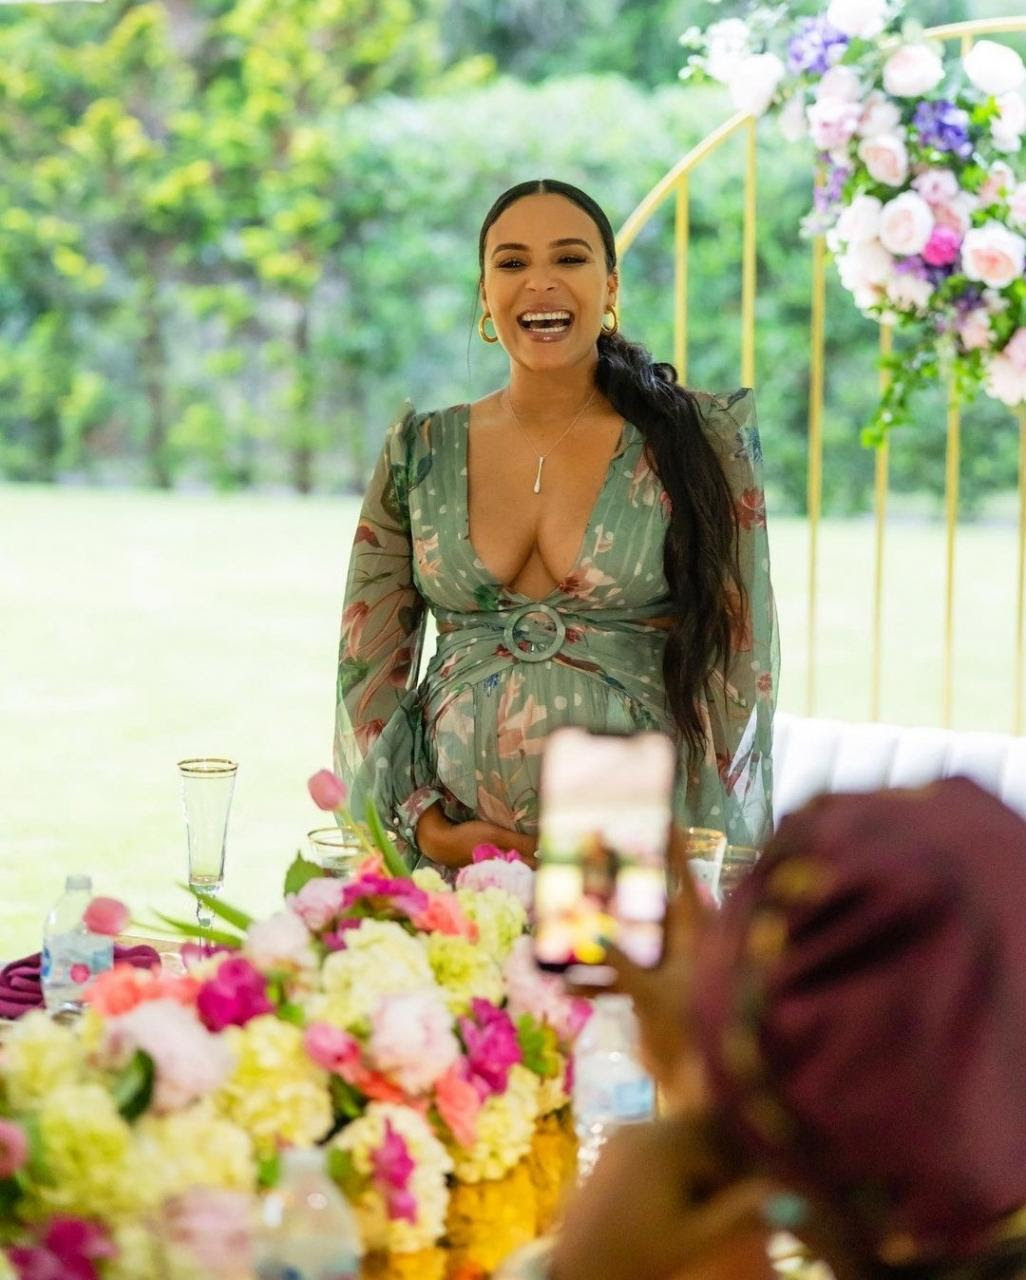 Ludacris and wife Eudoxie pictured at suprise baby shower thrown by friends (photos)